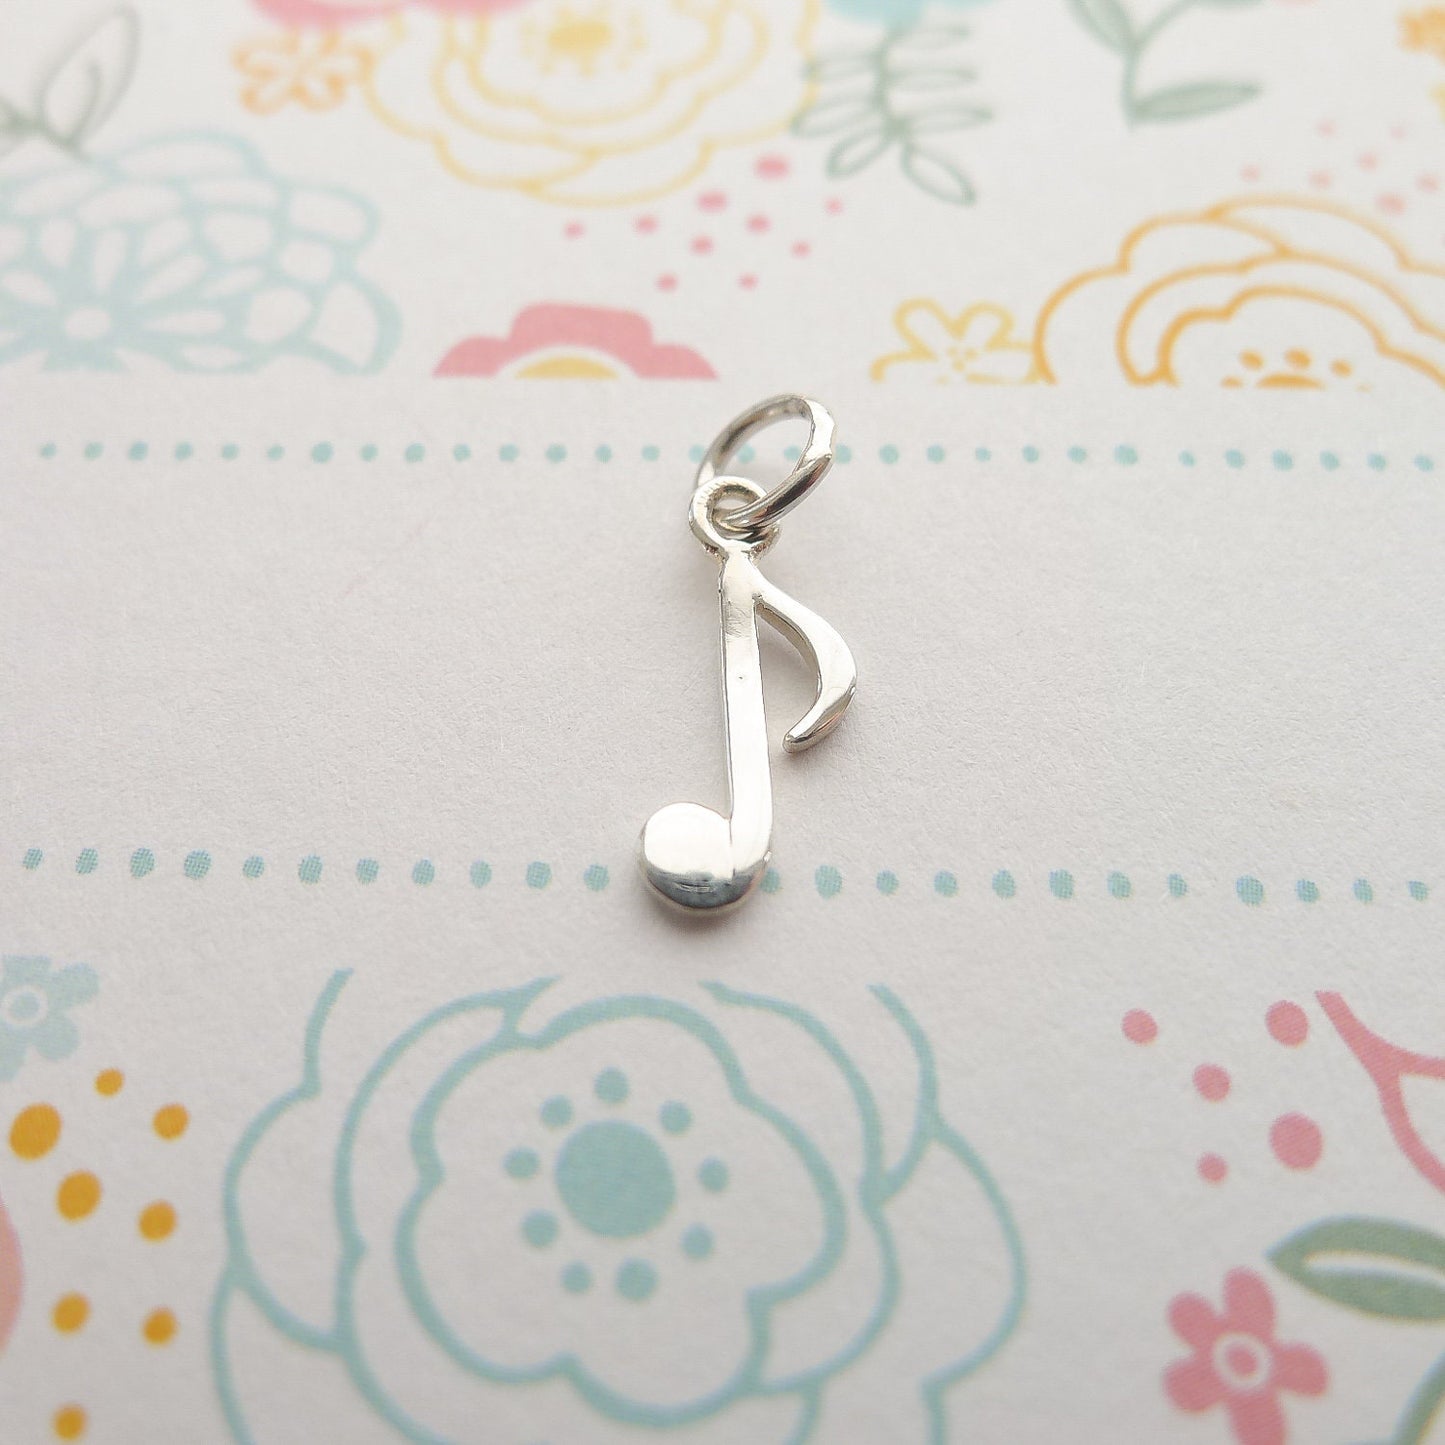 Musical Note Charm Music Pendant Sterling Silver Musician Jewelry